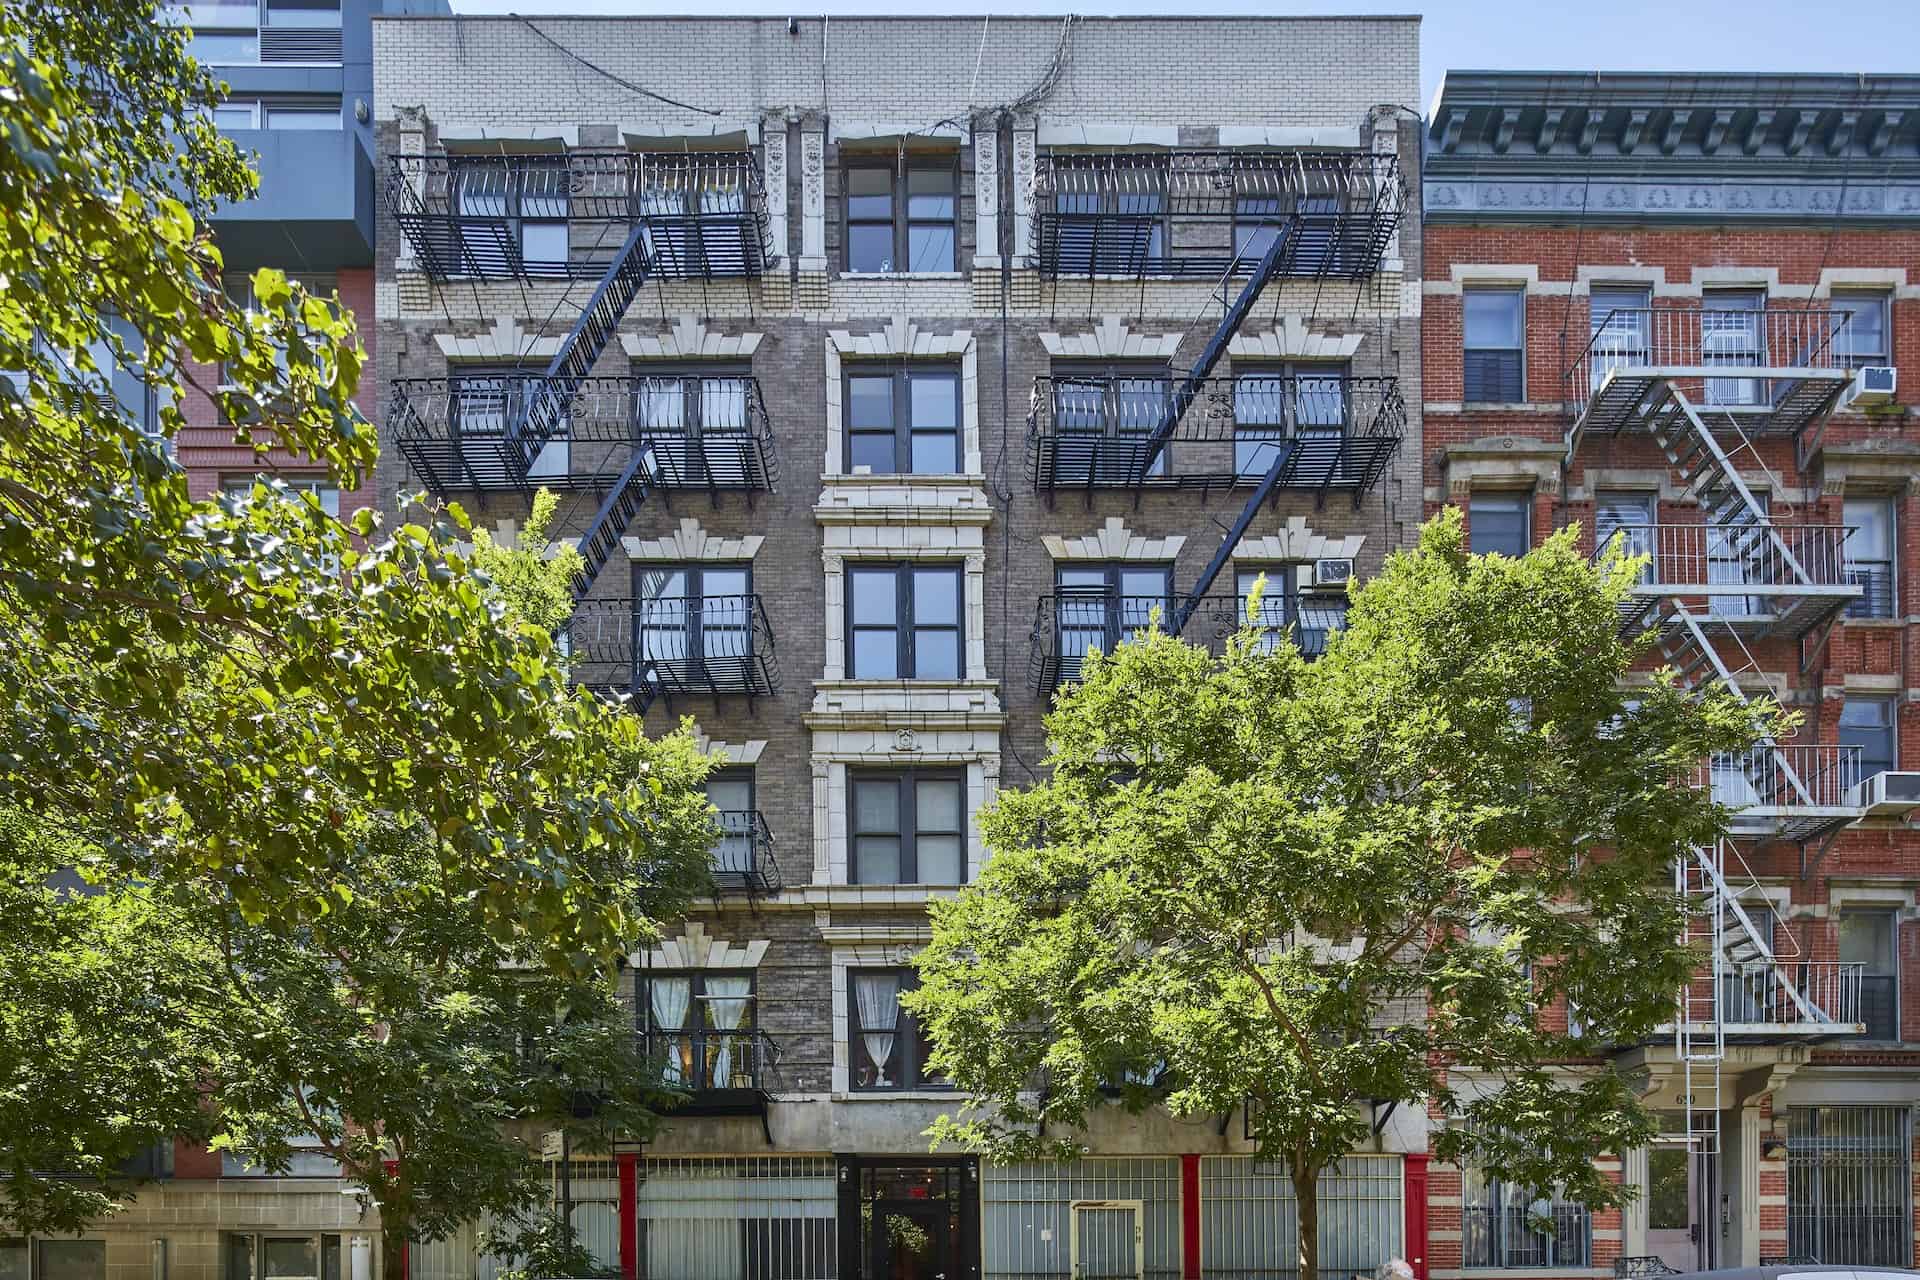 Street view of 634 East 11th Street, a brick apartment building in New York with front fire escapes and trees out front.